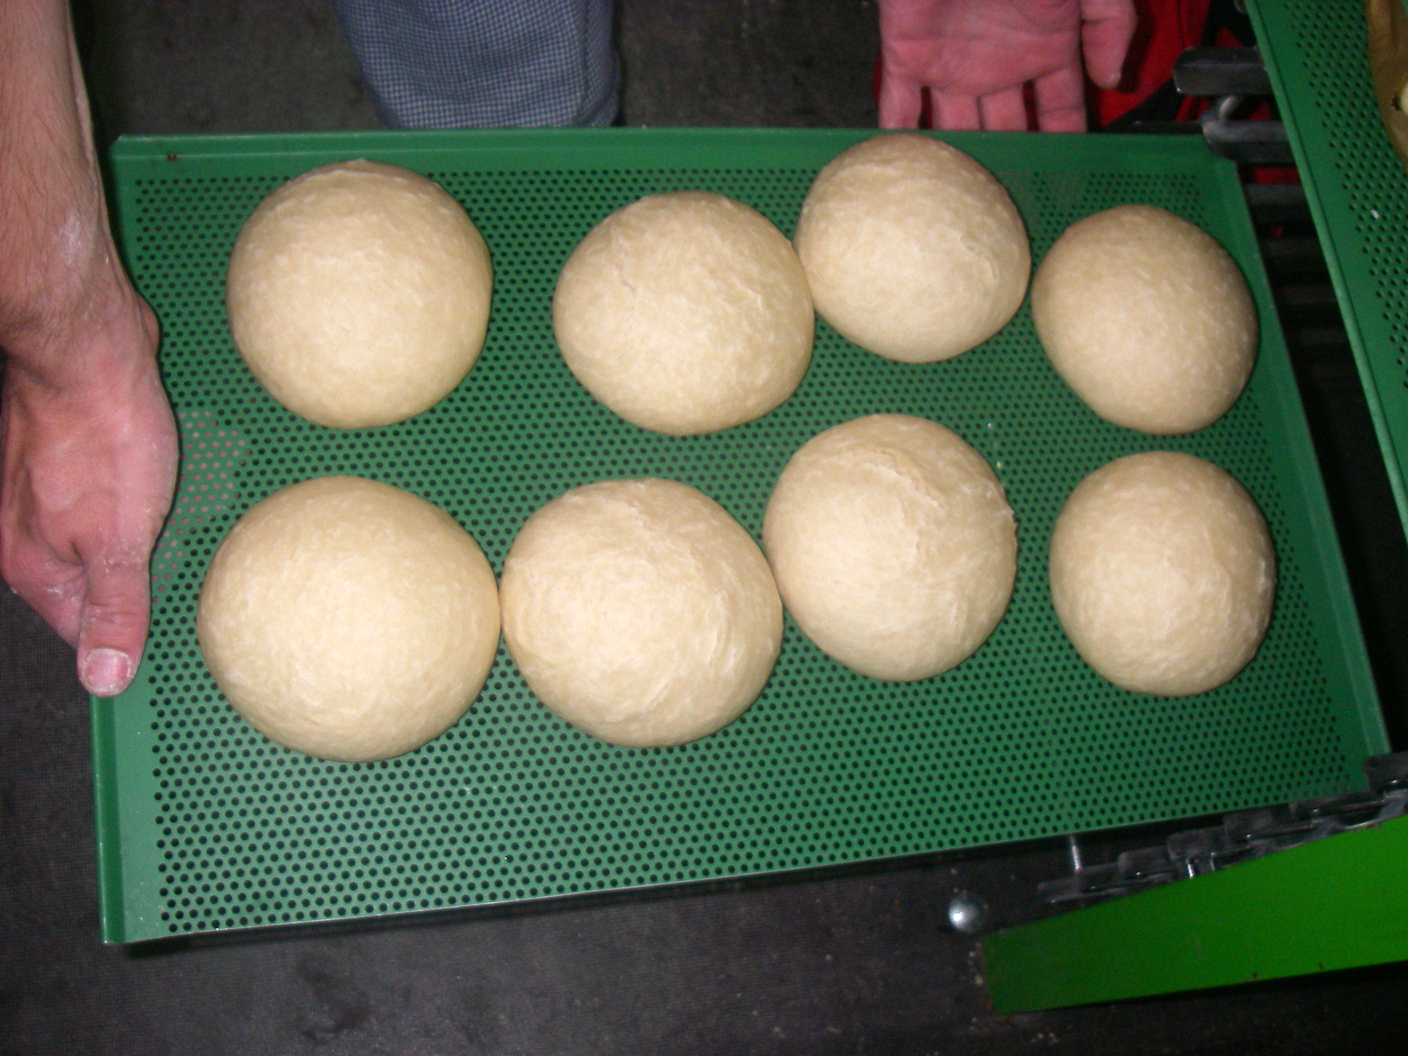 Dampfnudeln in the making